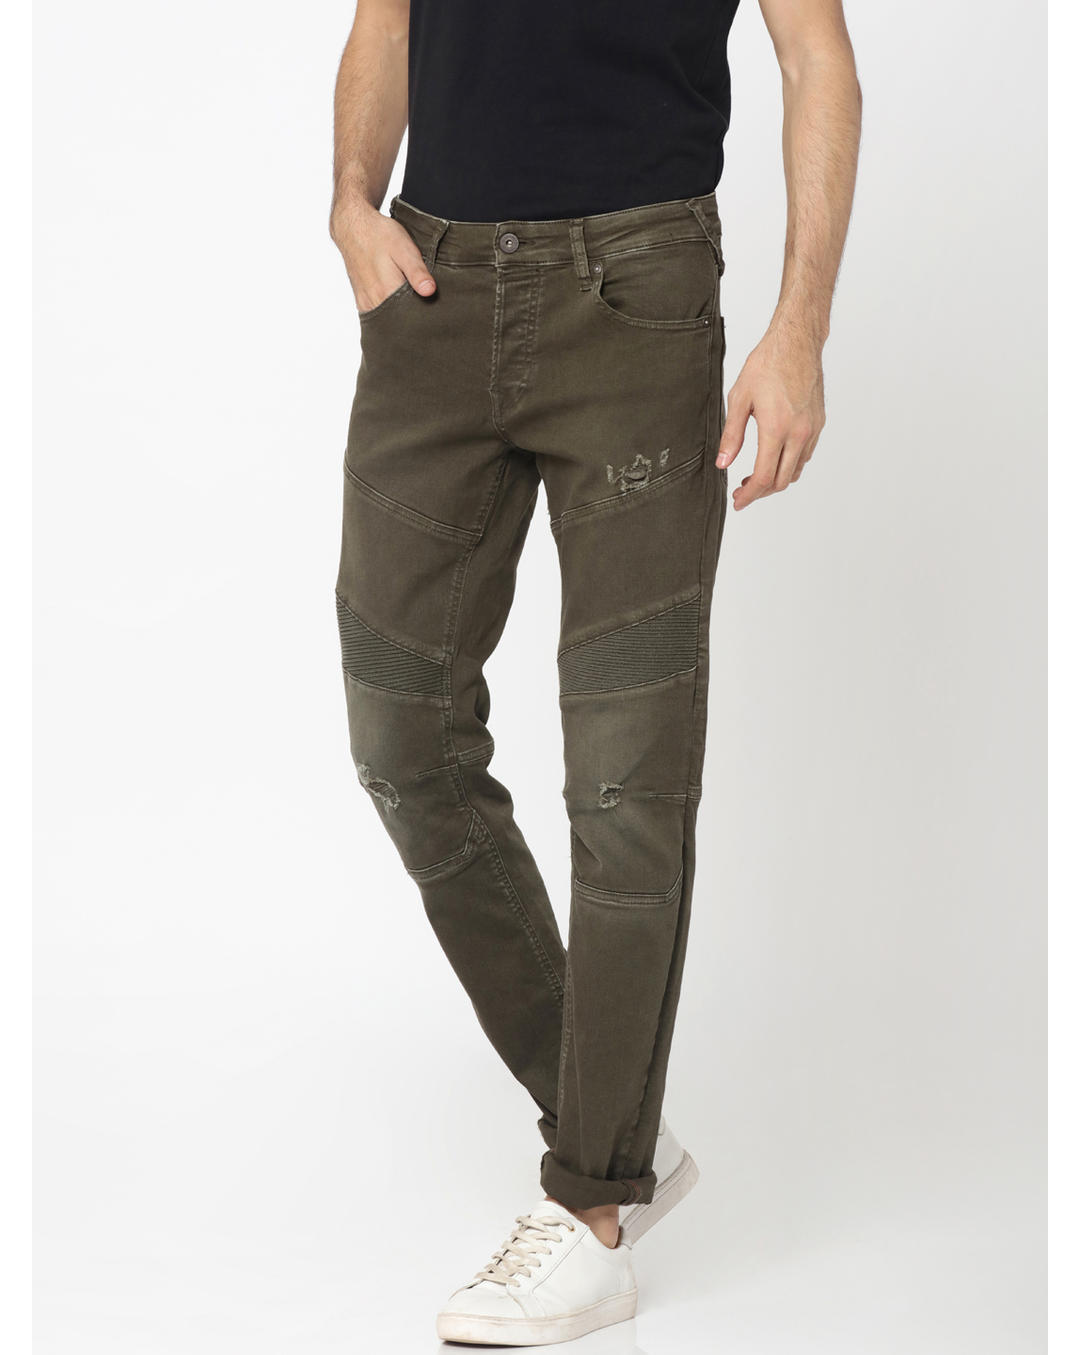 olive green jeans ripped